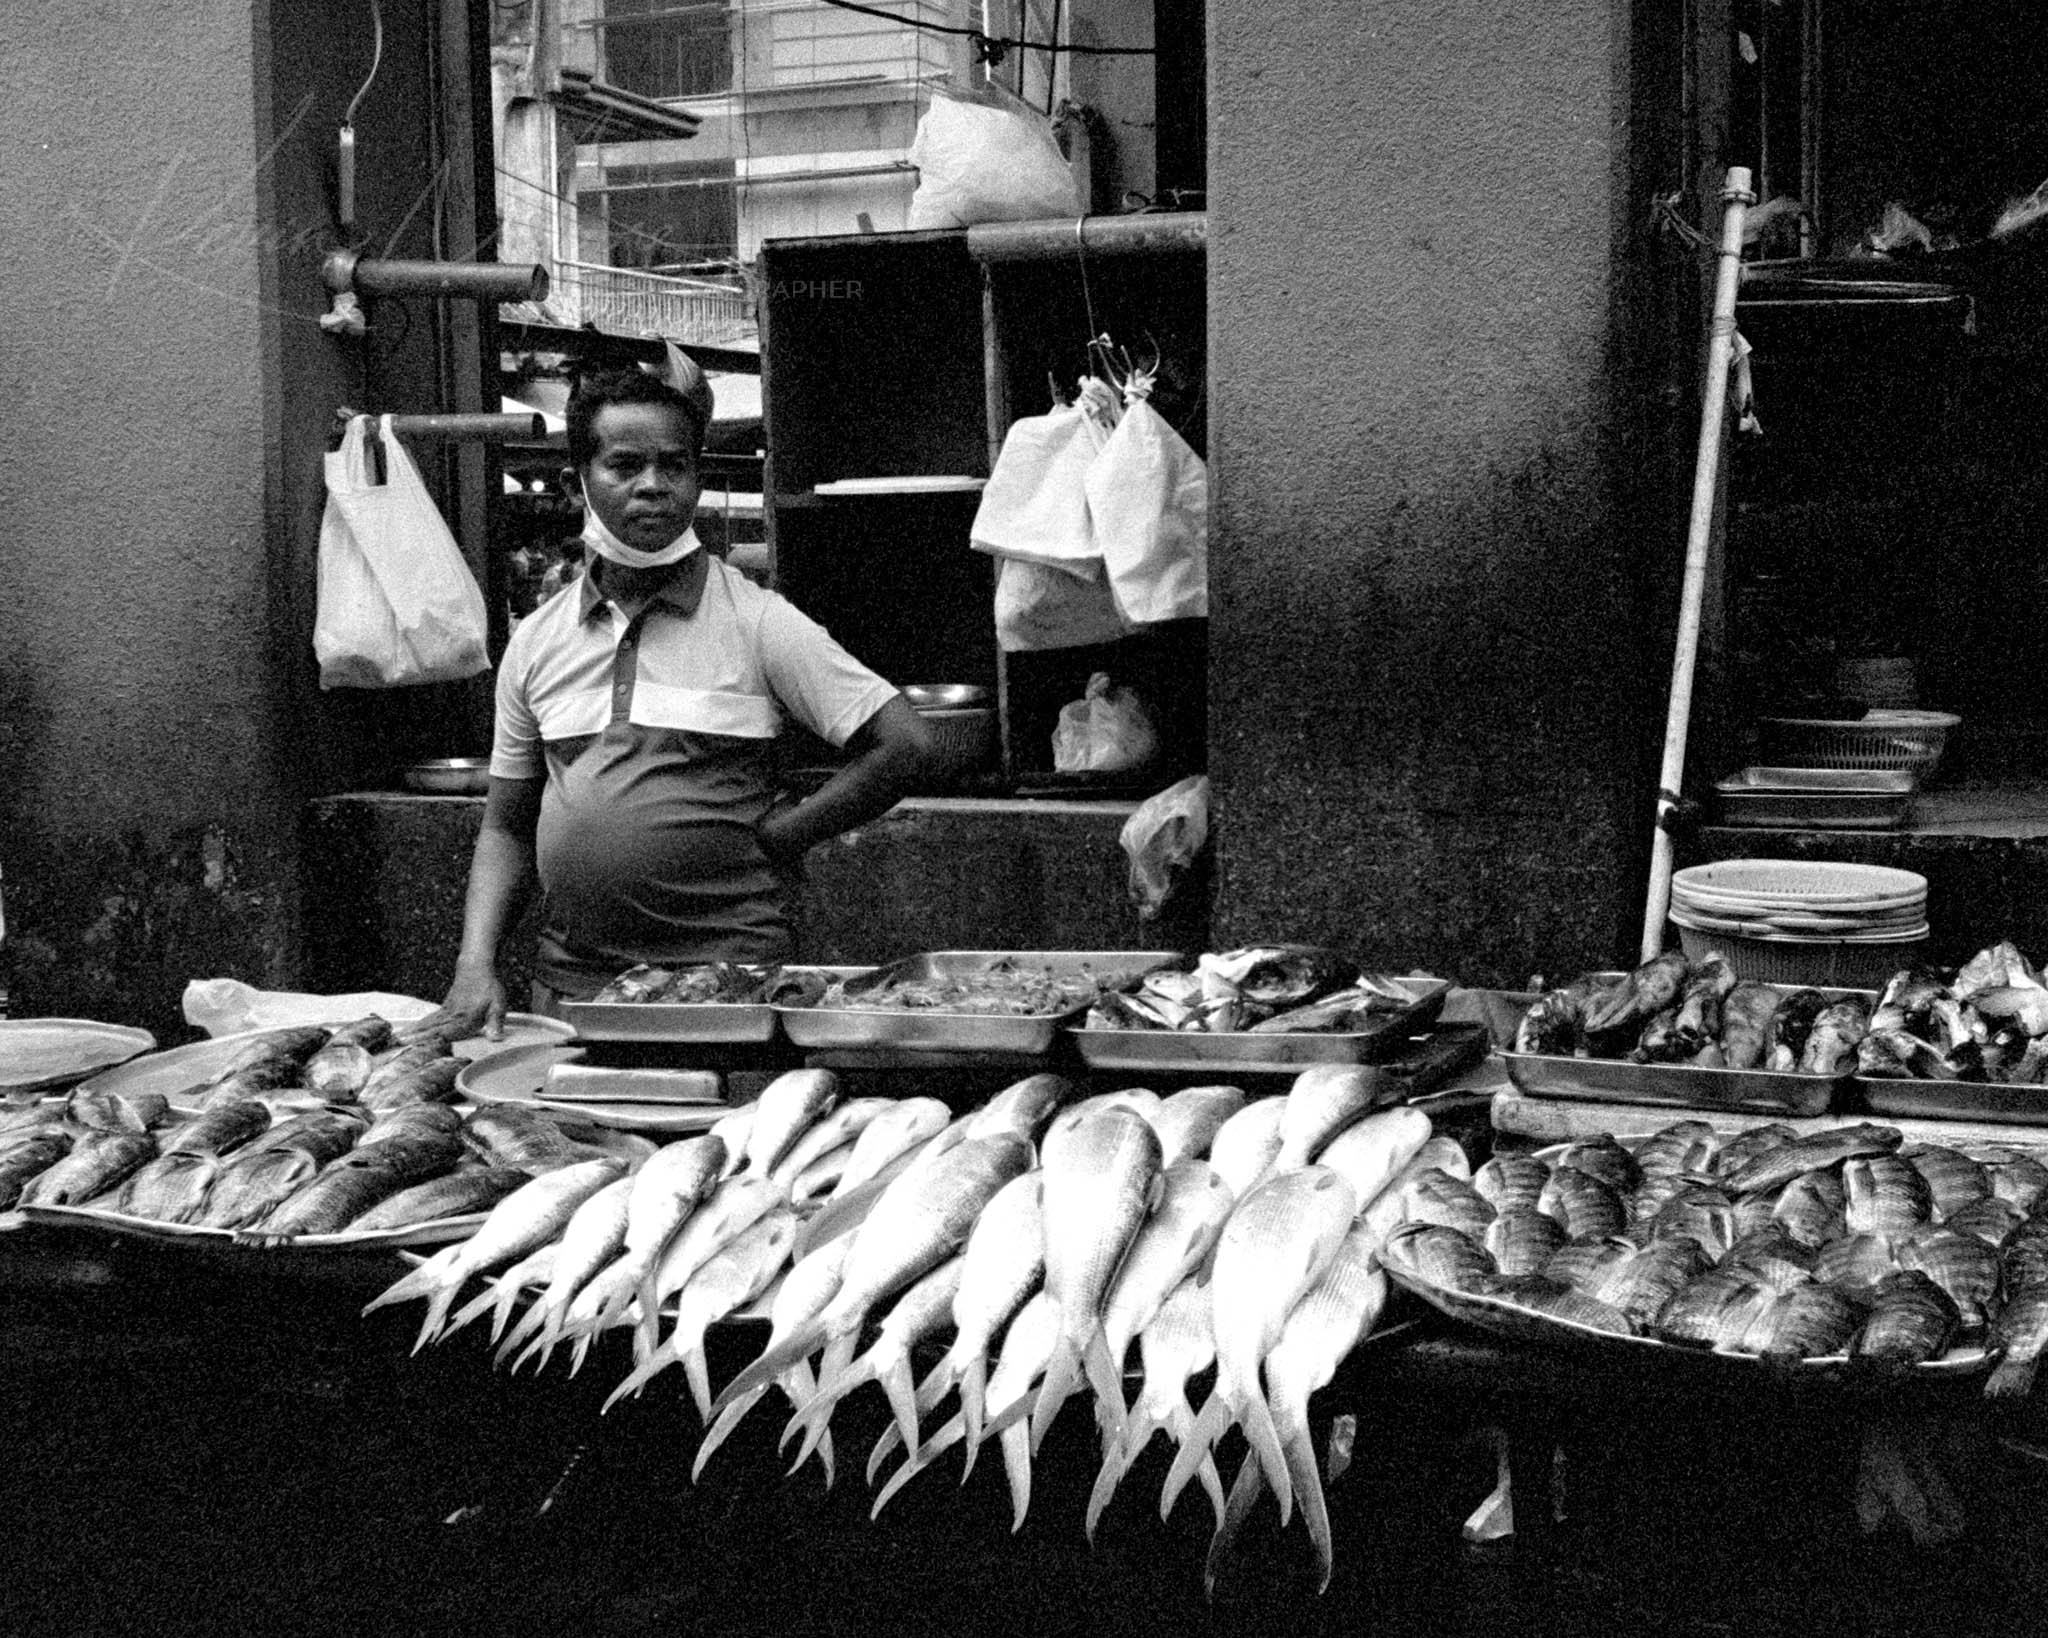 Smiling woman selling assorted fish at a traditional market in black-and-white photo.